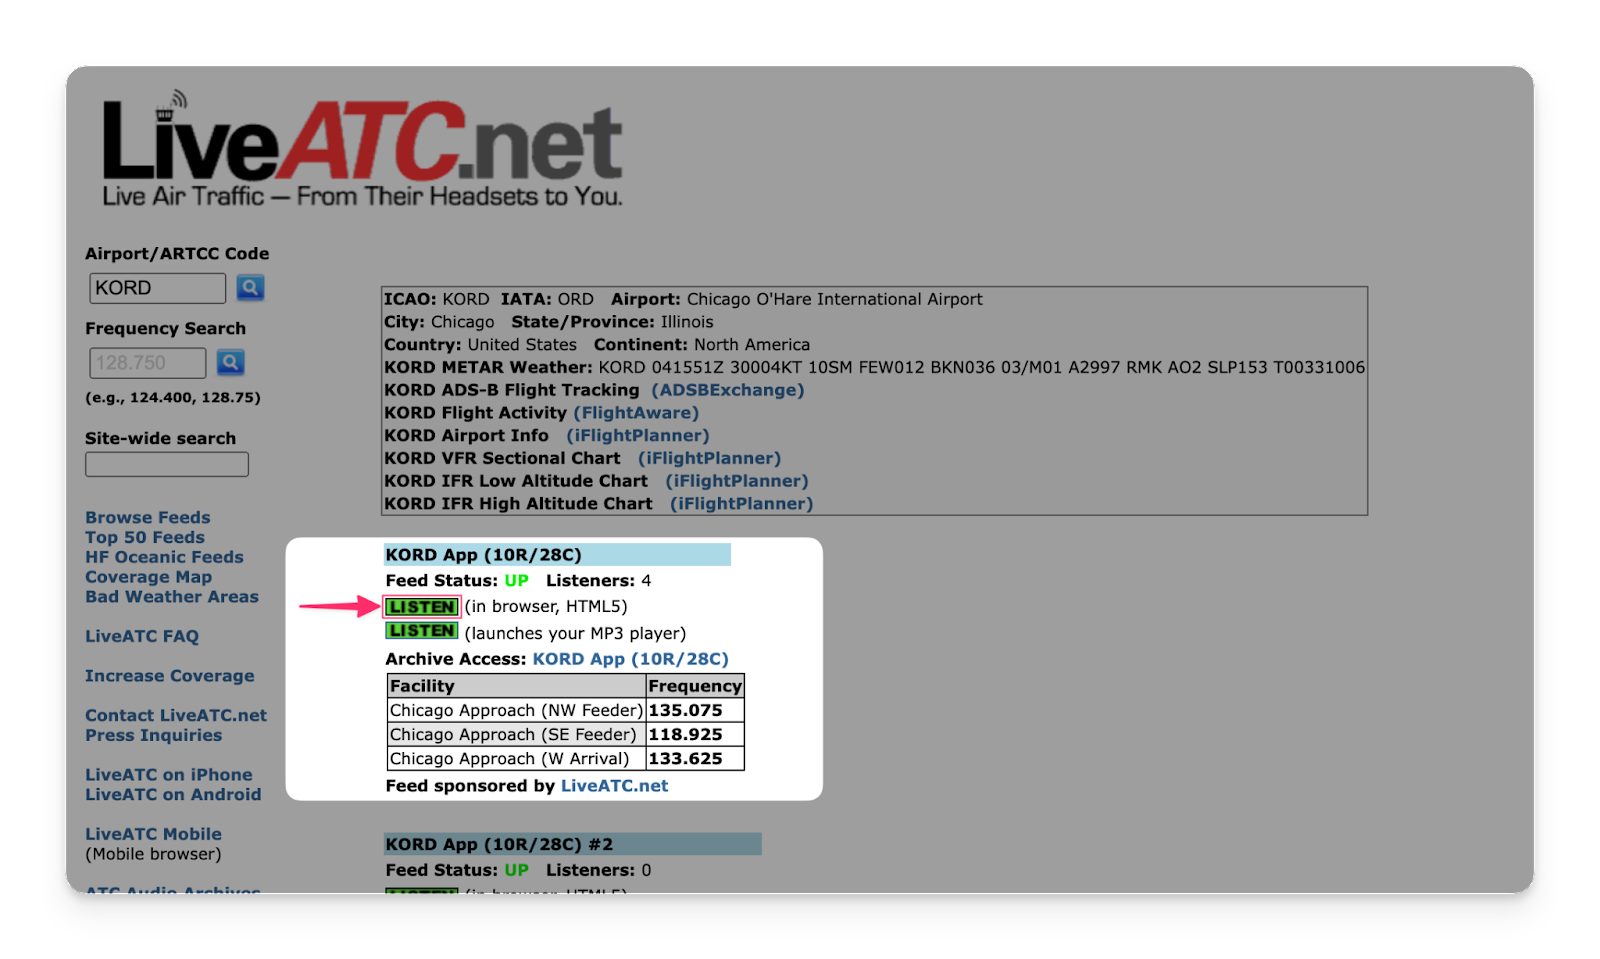 A screenshot of the LiveATC website with the Airport/ARTCC Code section highlighted. An arrow points to the listen button.